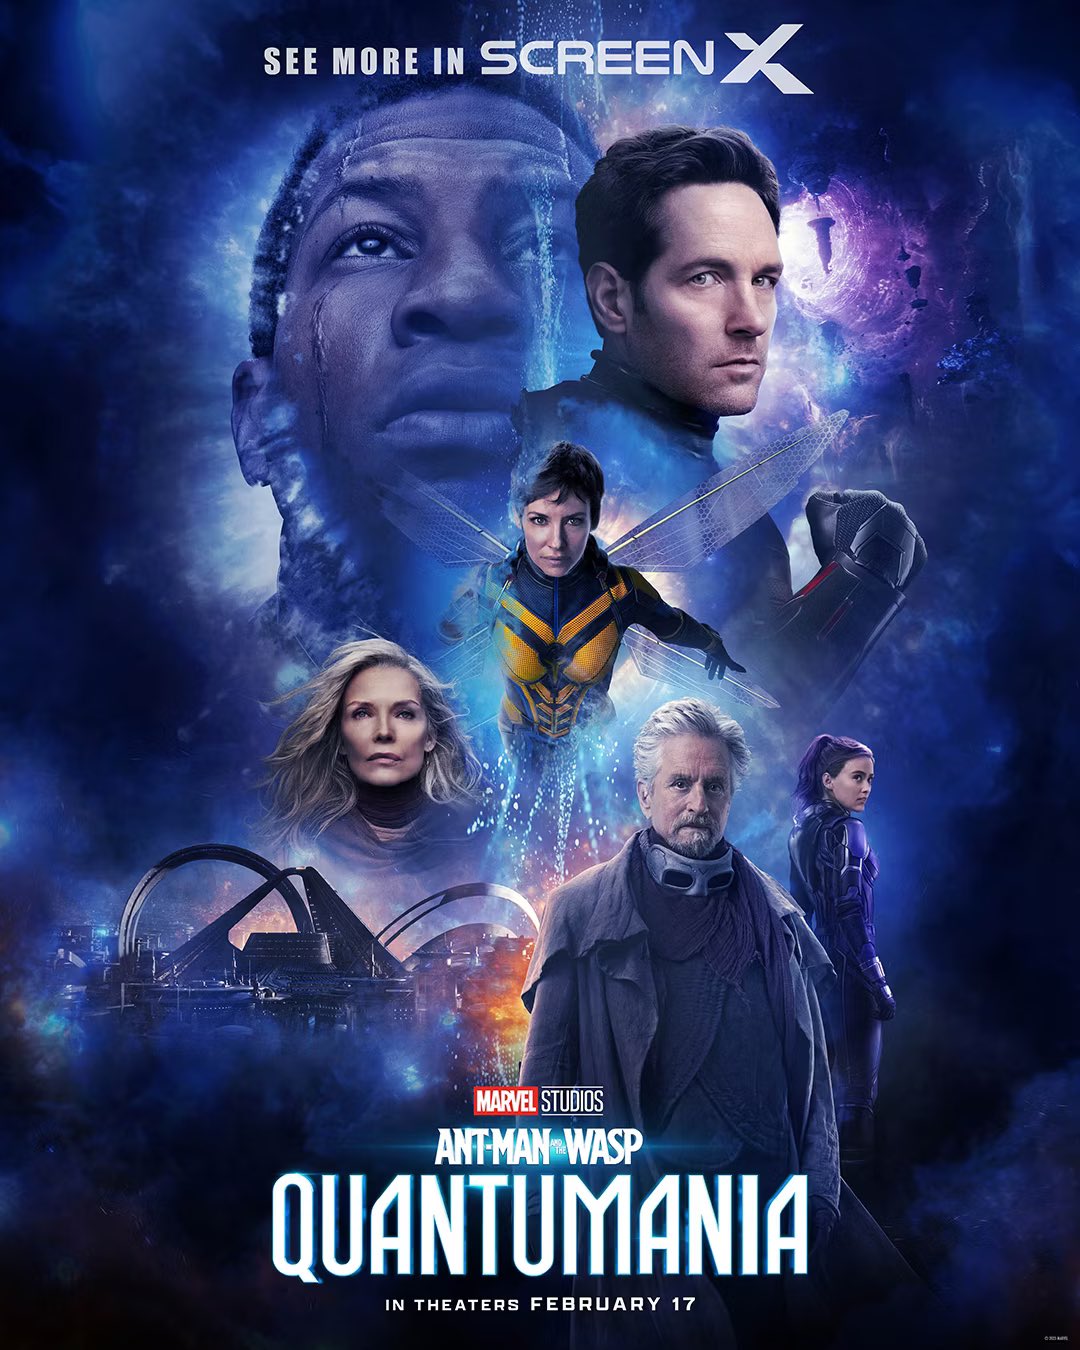 DiscussingFilm on Twitter: "New poster for 'ANT-MAN AND THE WASP:  QUANTUMANIA'. (Source: https://t.co/RJyf8AZAmK) https://t.co/bfkiFEbFwV" /  Twitter